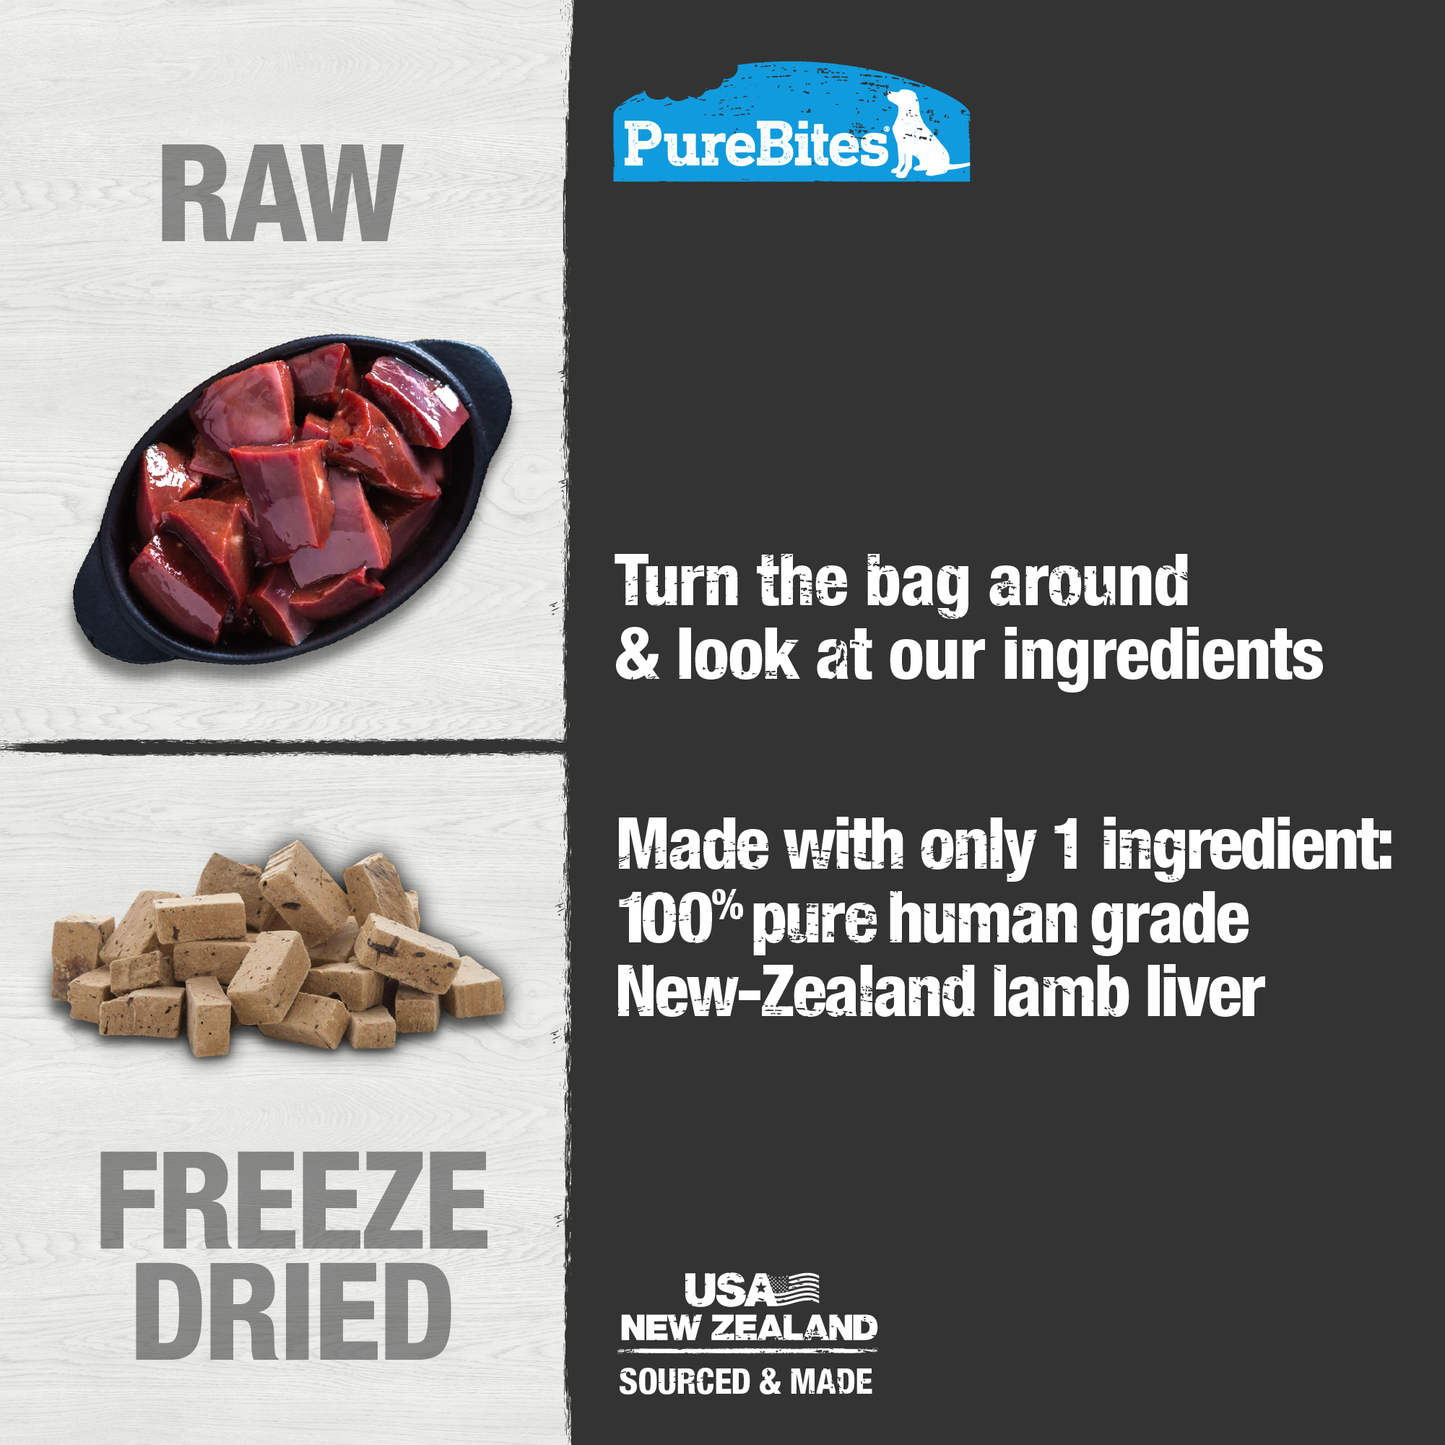 Made with only 1 Ingredient you can read, pronounce, and trust: New Zealand sourced human grade lamb liver.